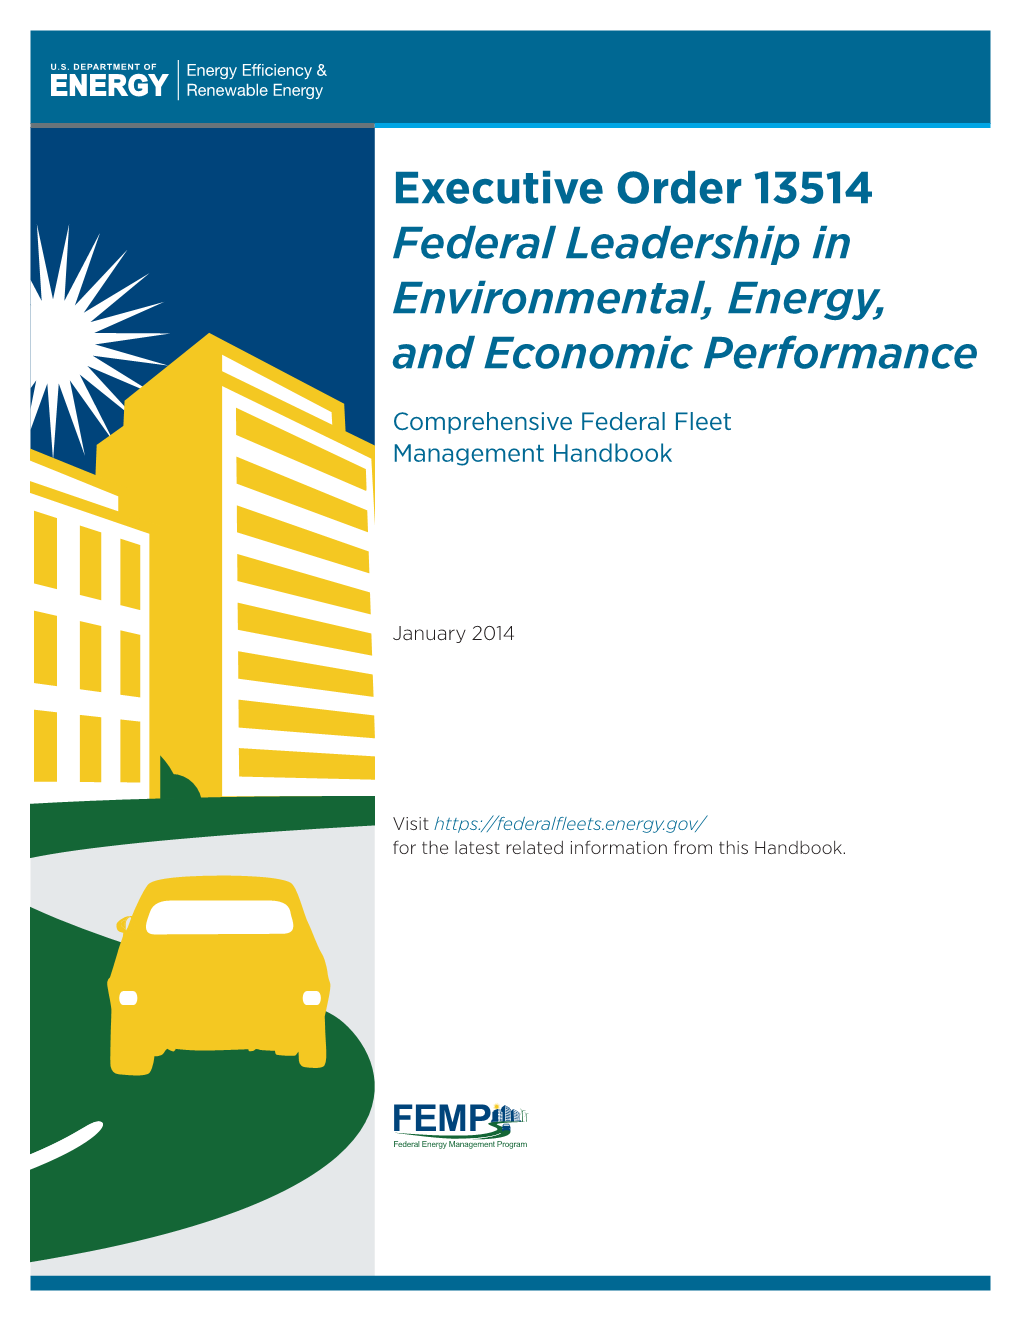 Executive Order 13514 Federal Leadership in Environmental, Energy, and Economic Performance